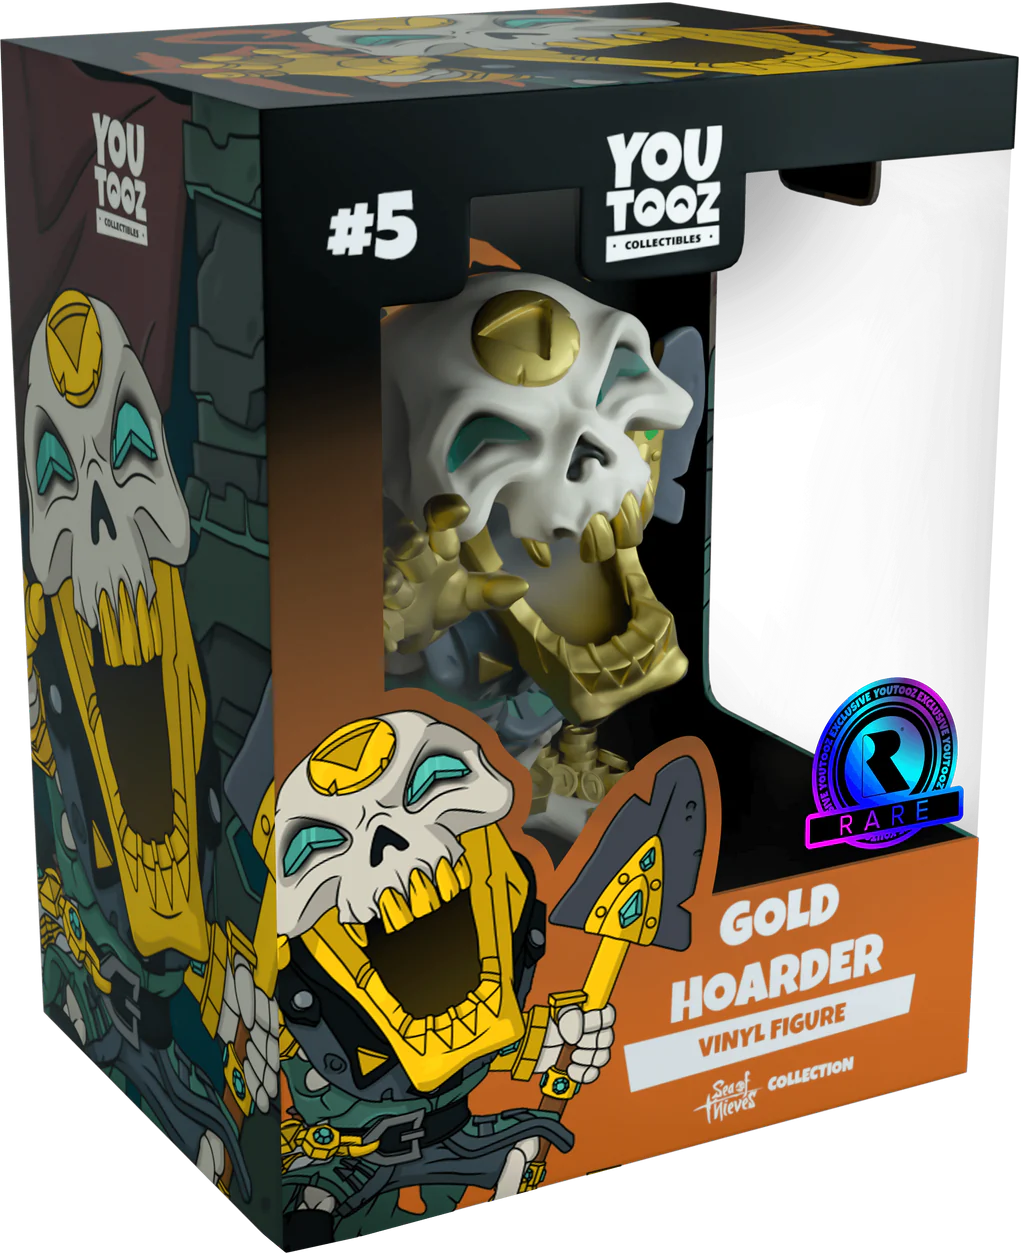 Sea of Thieves Gold Hoarder Youtooz Vinyl Figure